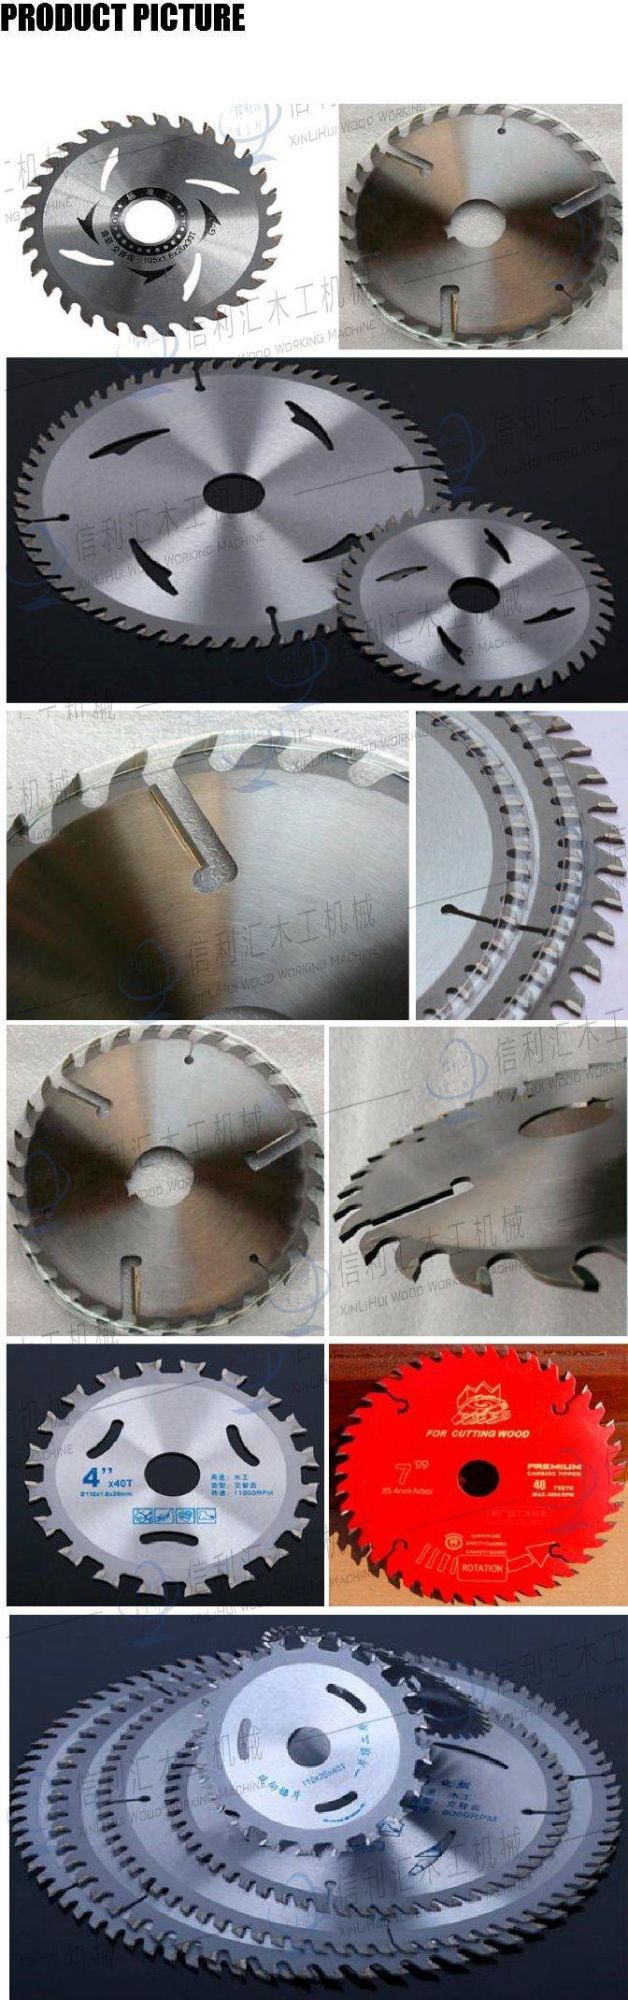 Roller Shutter Hinges, Saw Blade, Saw Blade Black Horse, Saw Blade Diamond Saw Blade for Granite, Circular Saw Blade for Wood Machine Accessories